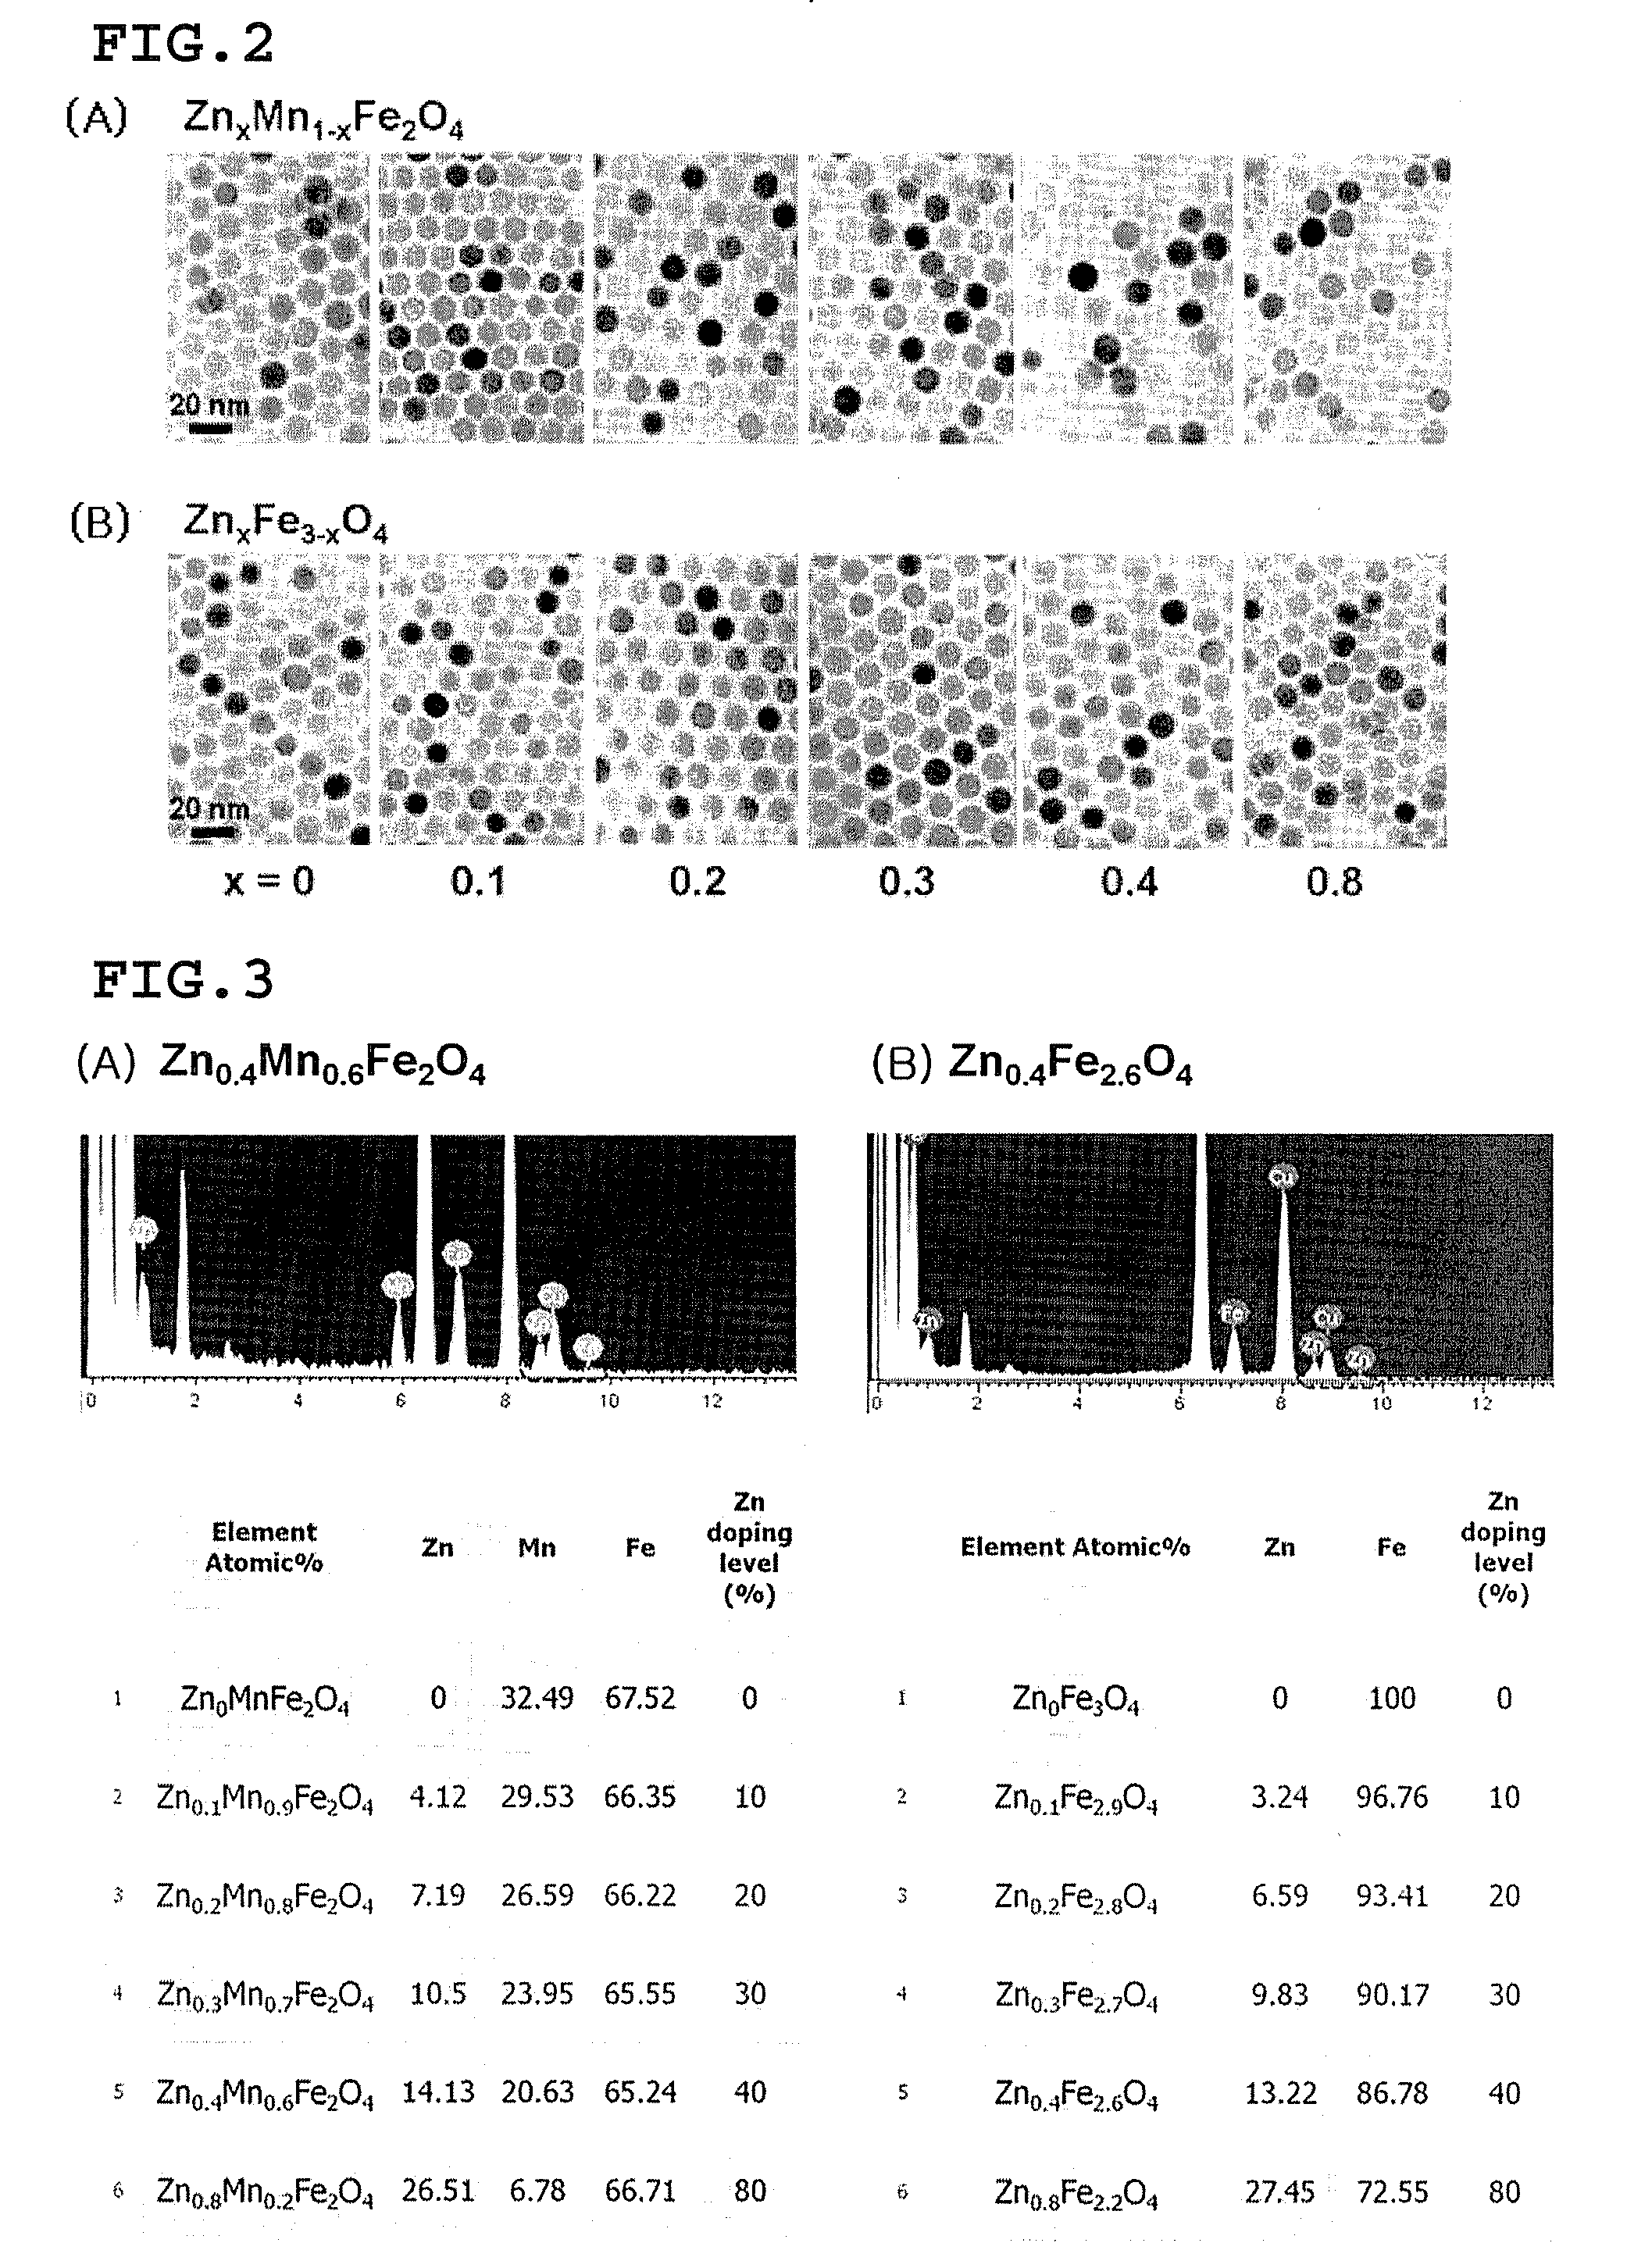 Magnetic resonance imaging contrast agents comprising zinc-containing magnetic metal oxide nanoparticles